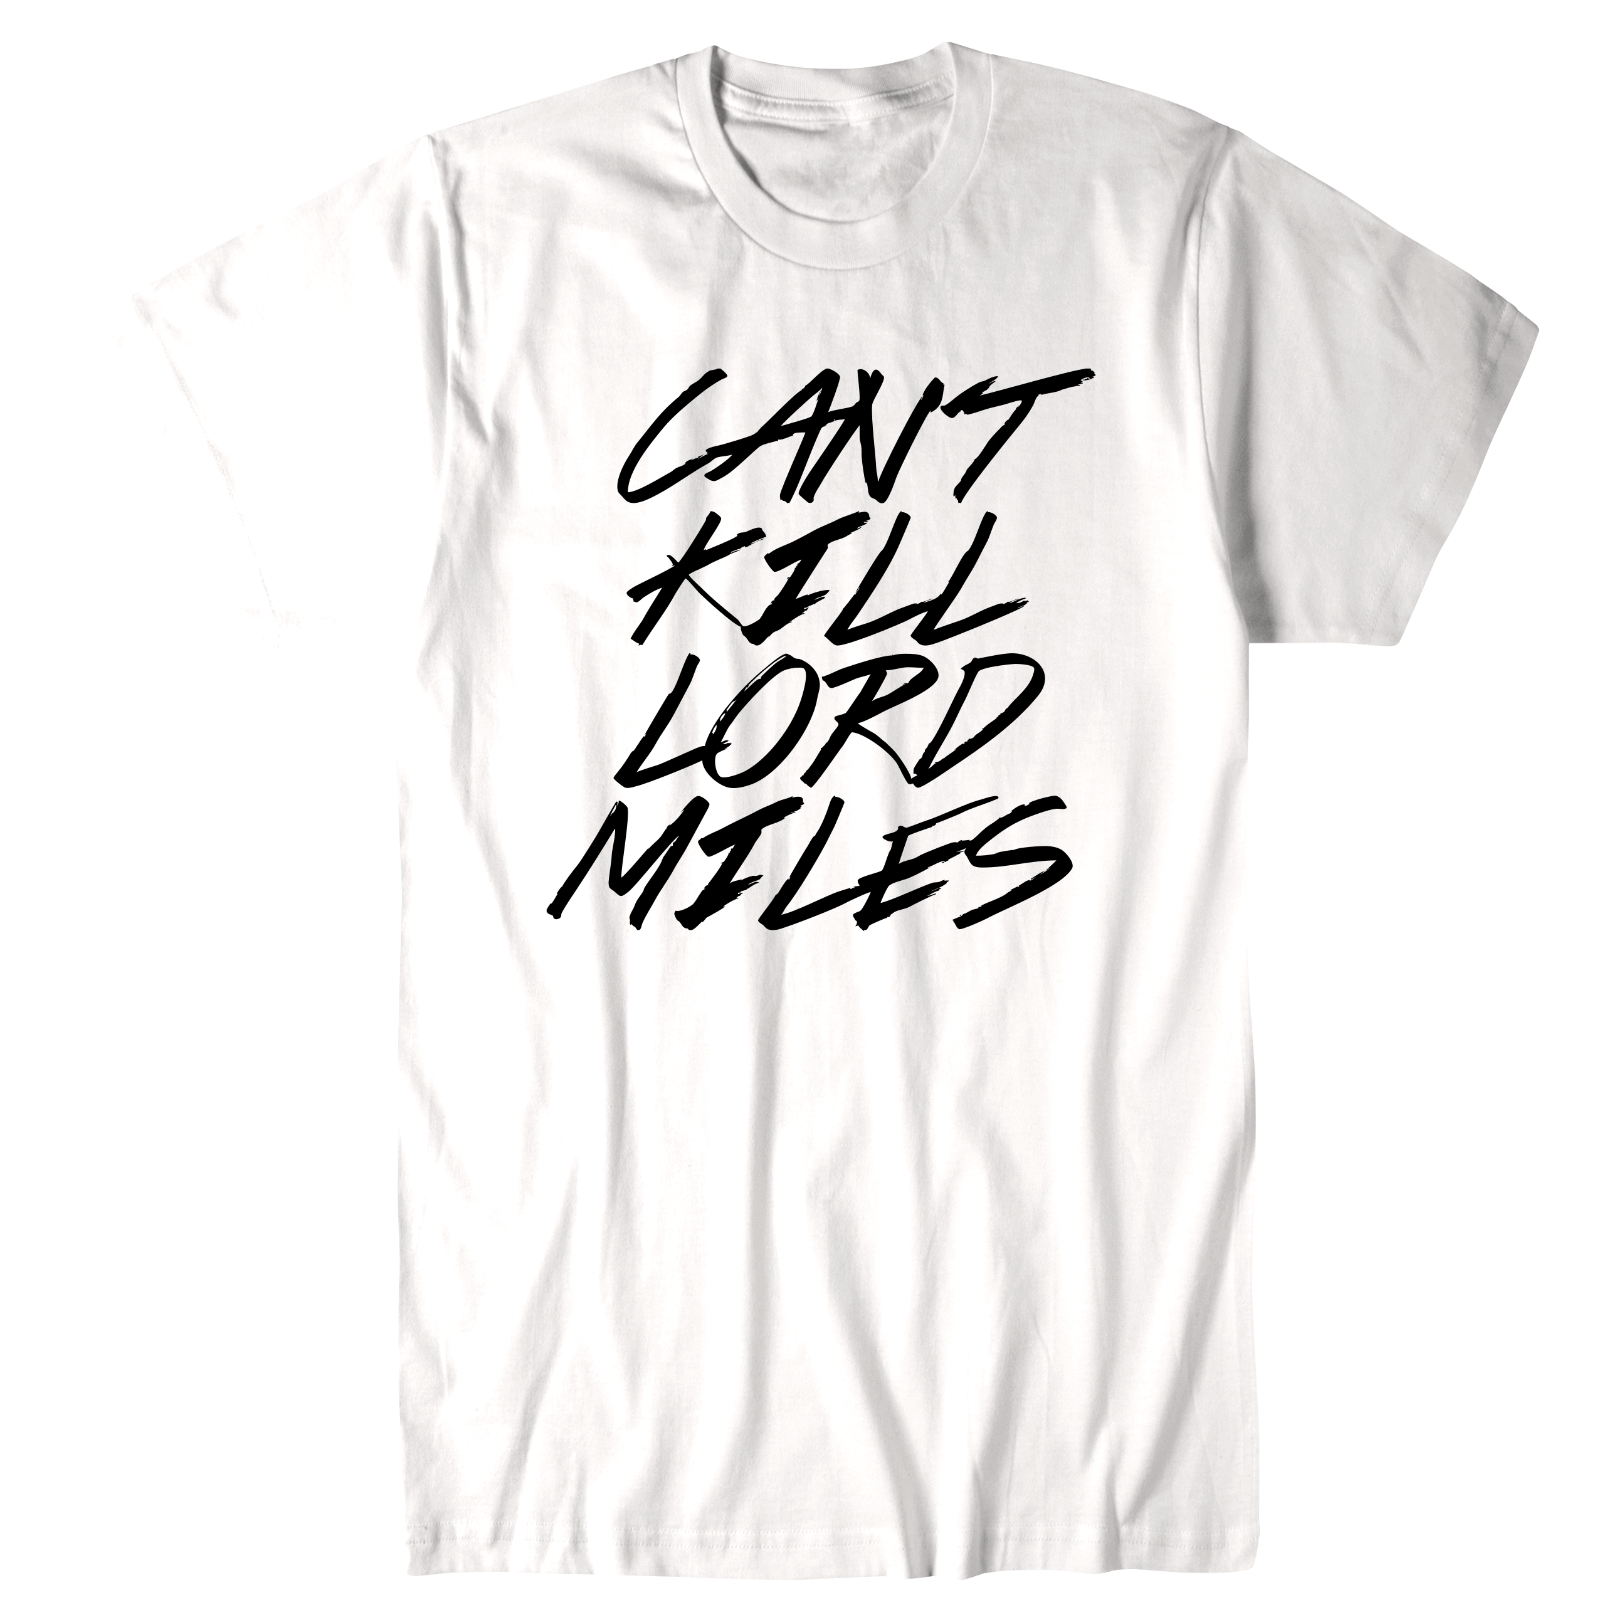 Cant Kill Lord Miles (White) T-Shirt